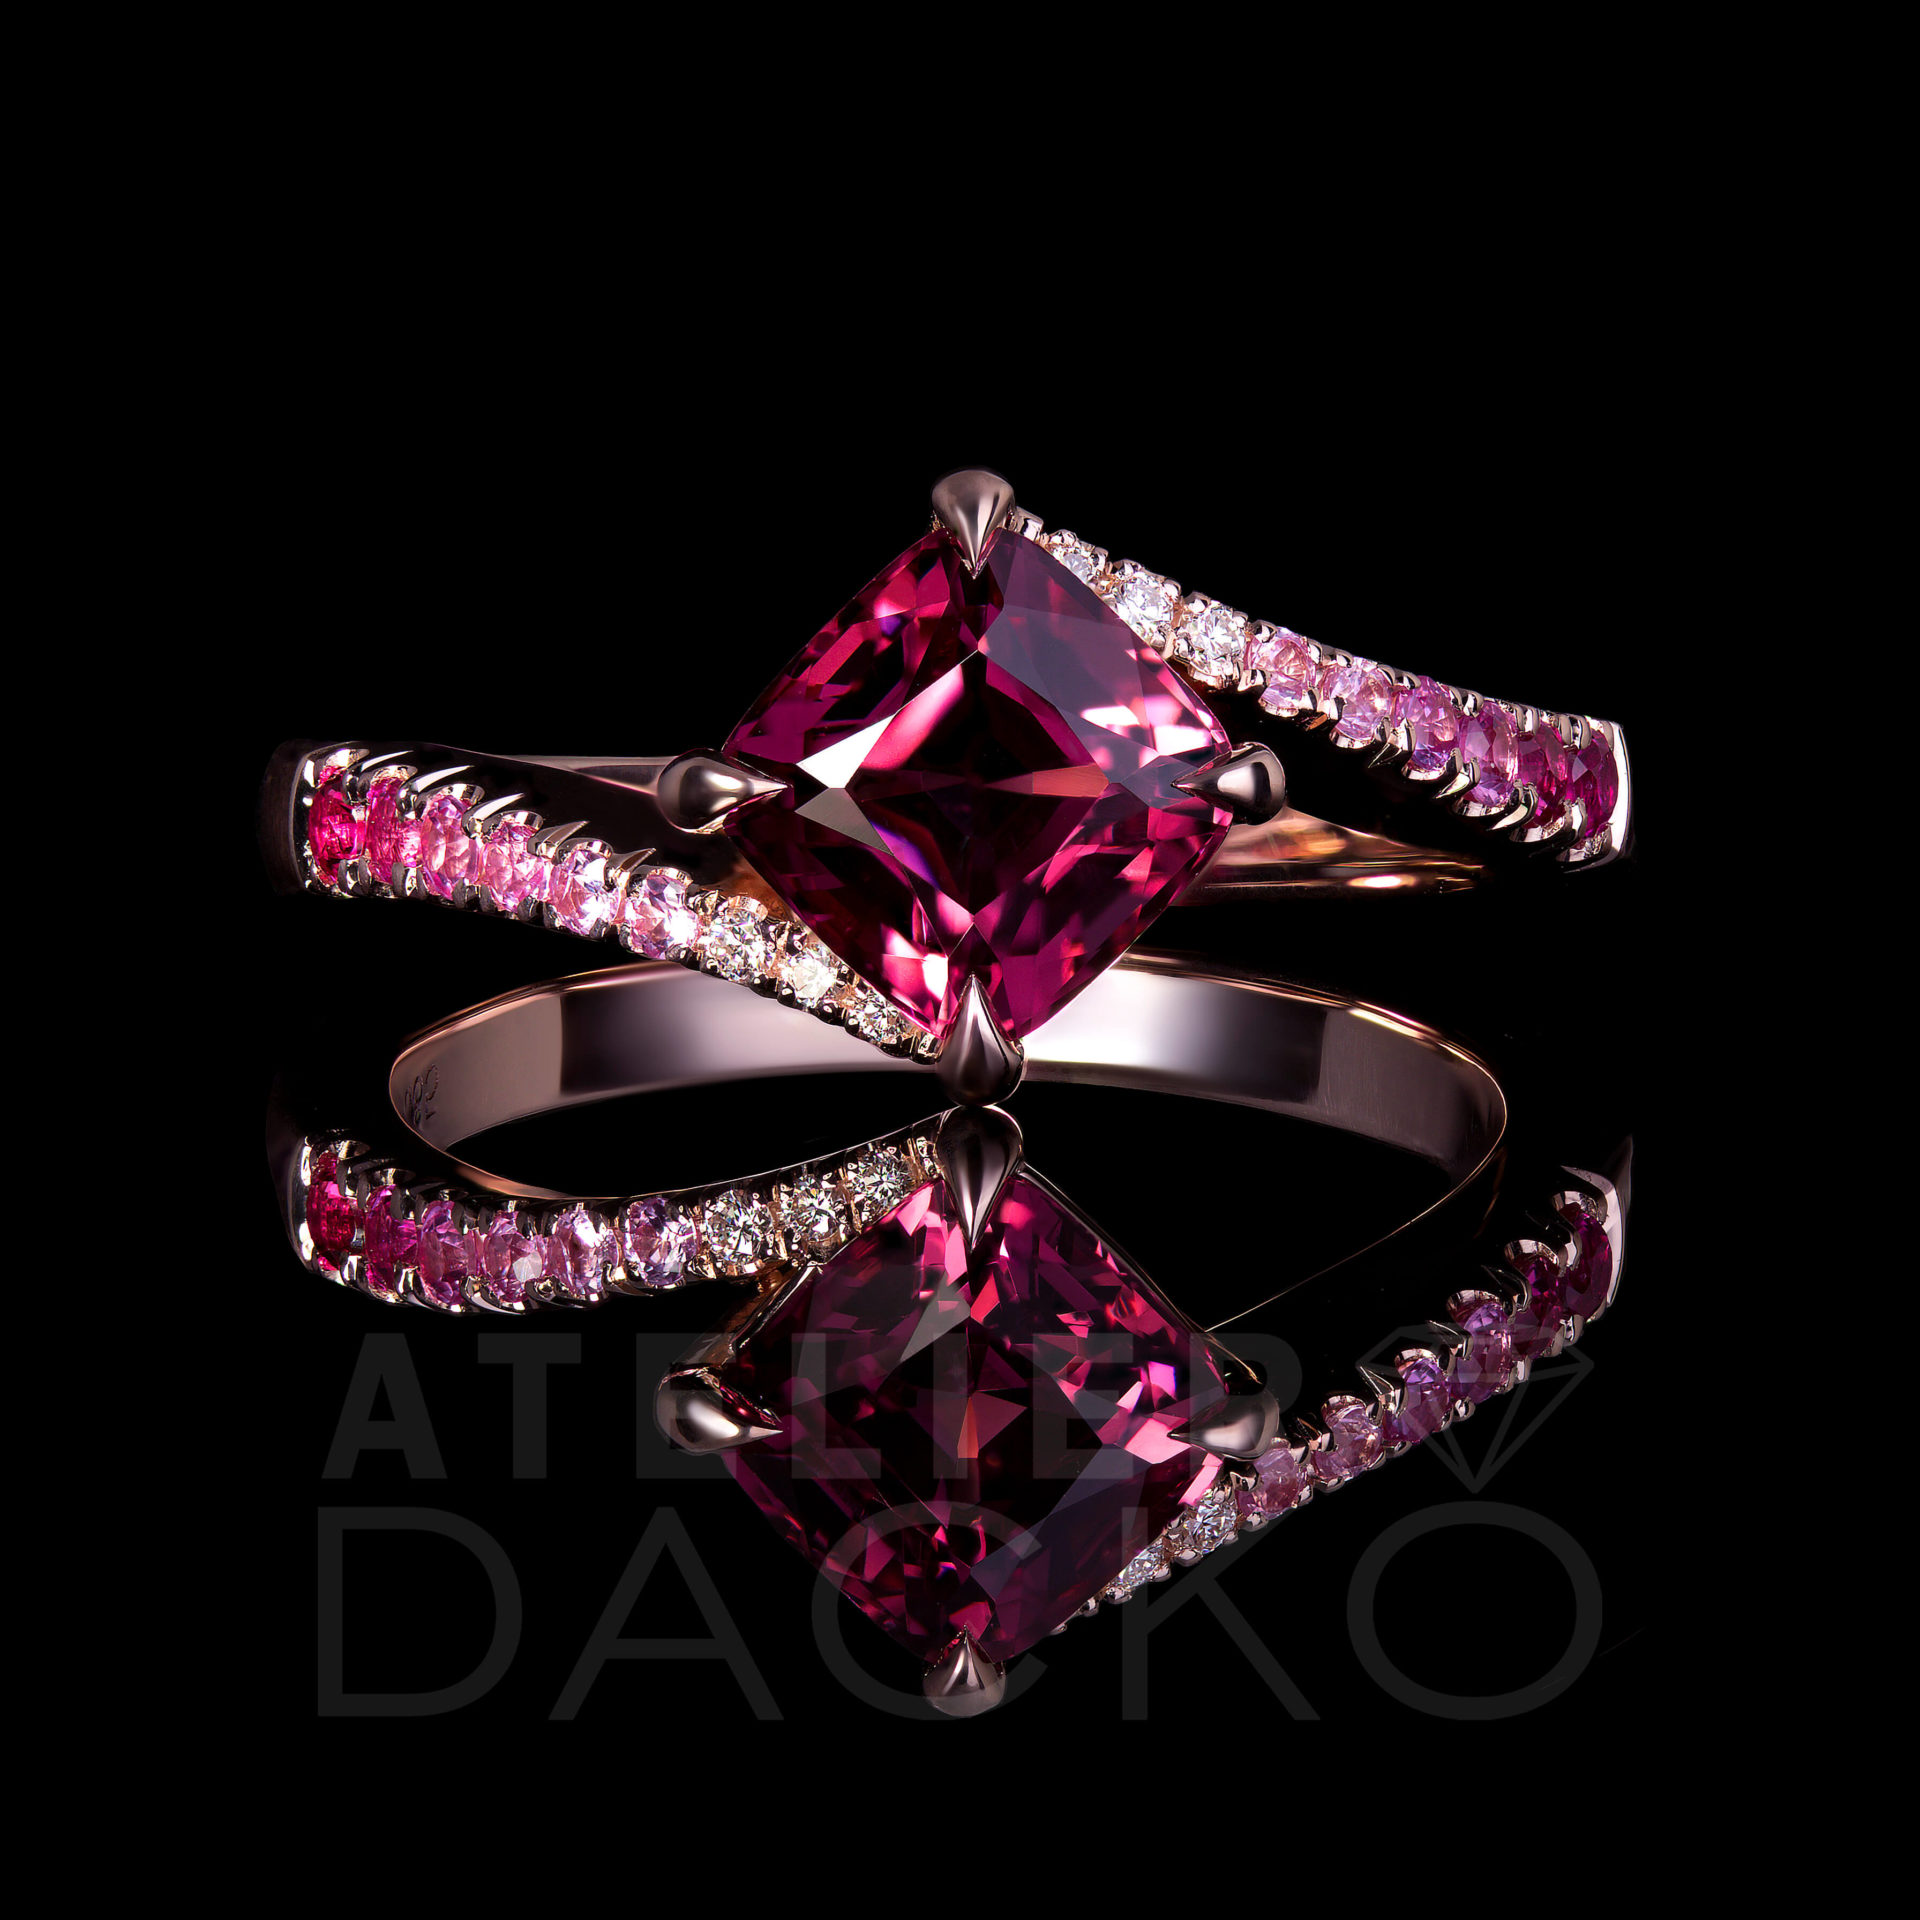 AD057 - 1.28 CT Raspberry Pink Spinel Ring with Gradient Shank - 1